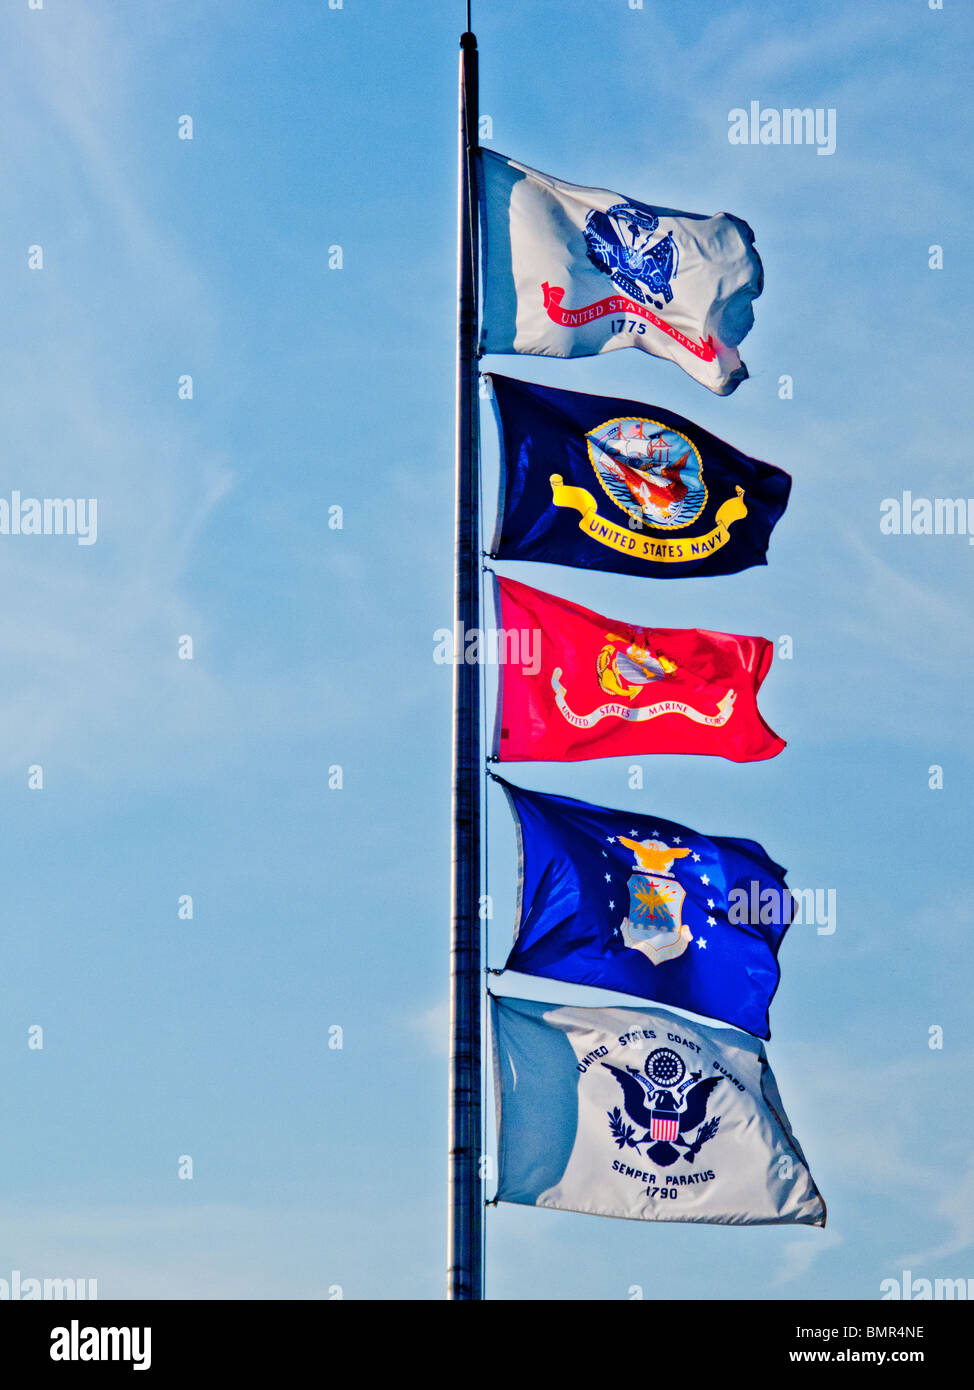 Flags of (top to bottom) the U.S. Army, U.S. Navy, U.S. Marine Corps, U.S. Air Force and U.S. Coast Guard flutter from a pole . Stock Photo